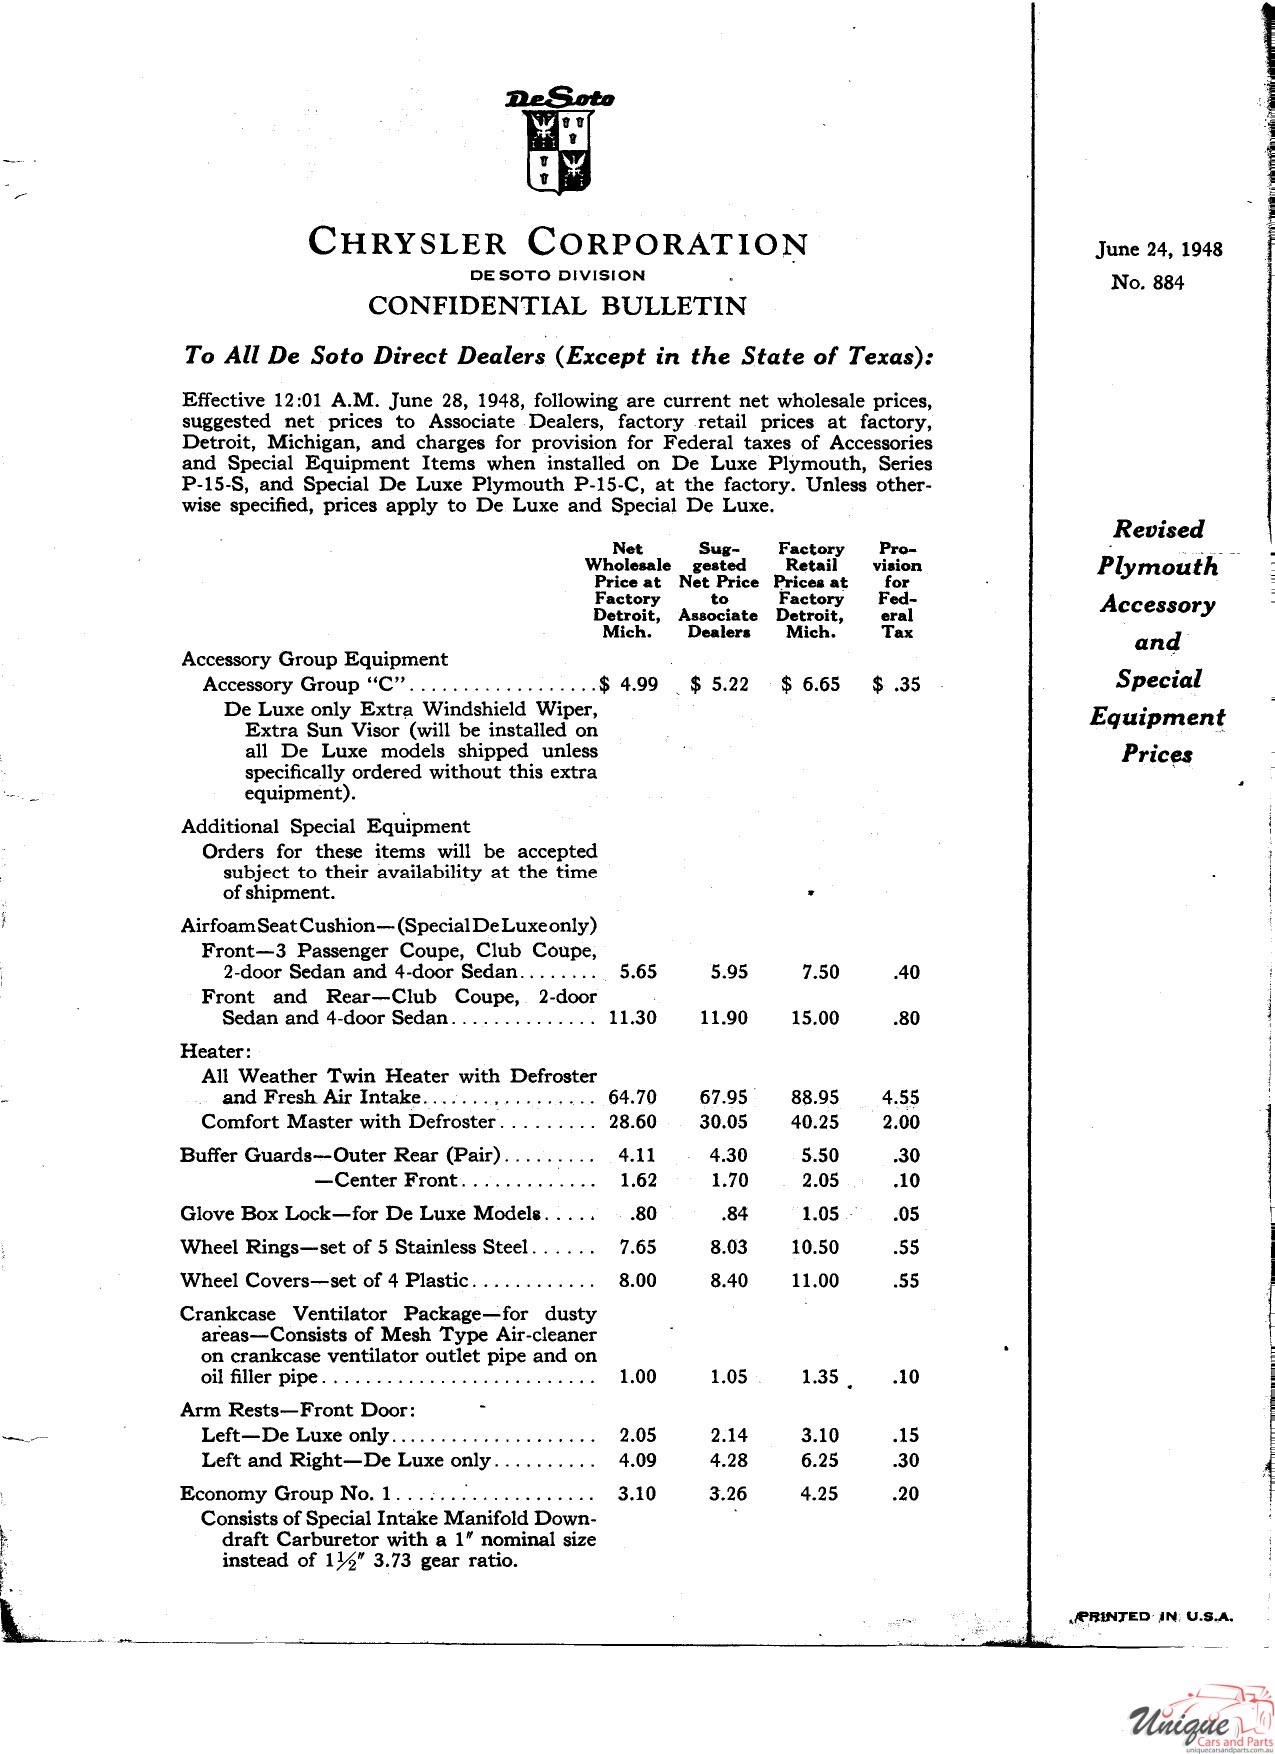 1948 Plymouth Revised Accessory Price List